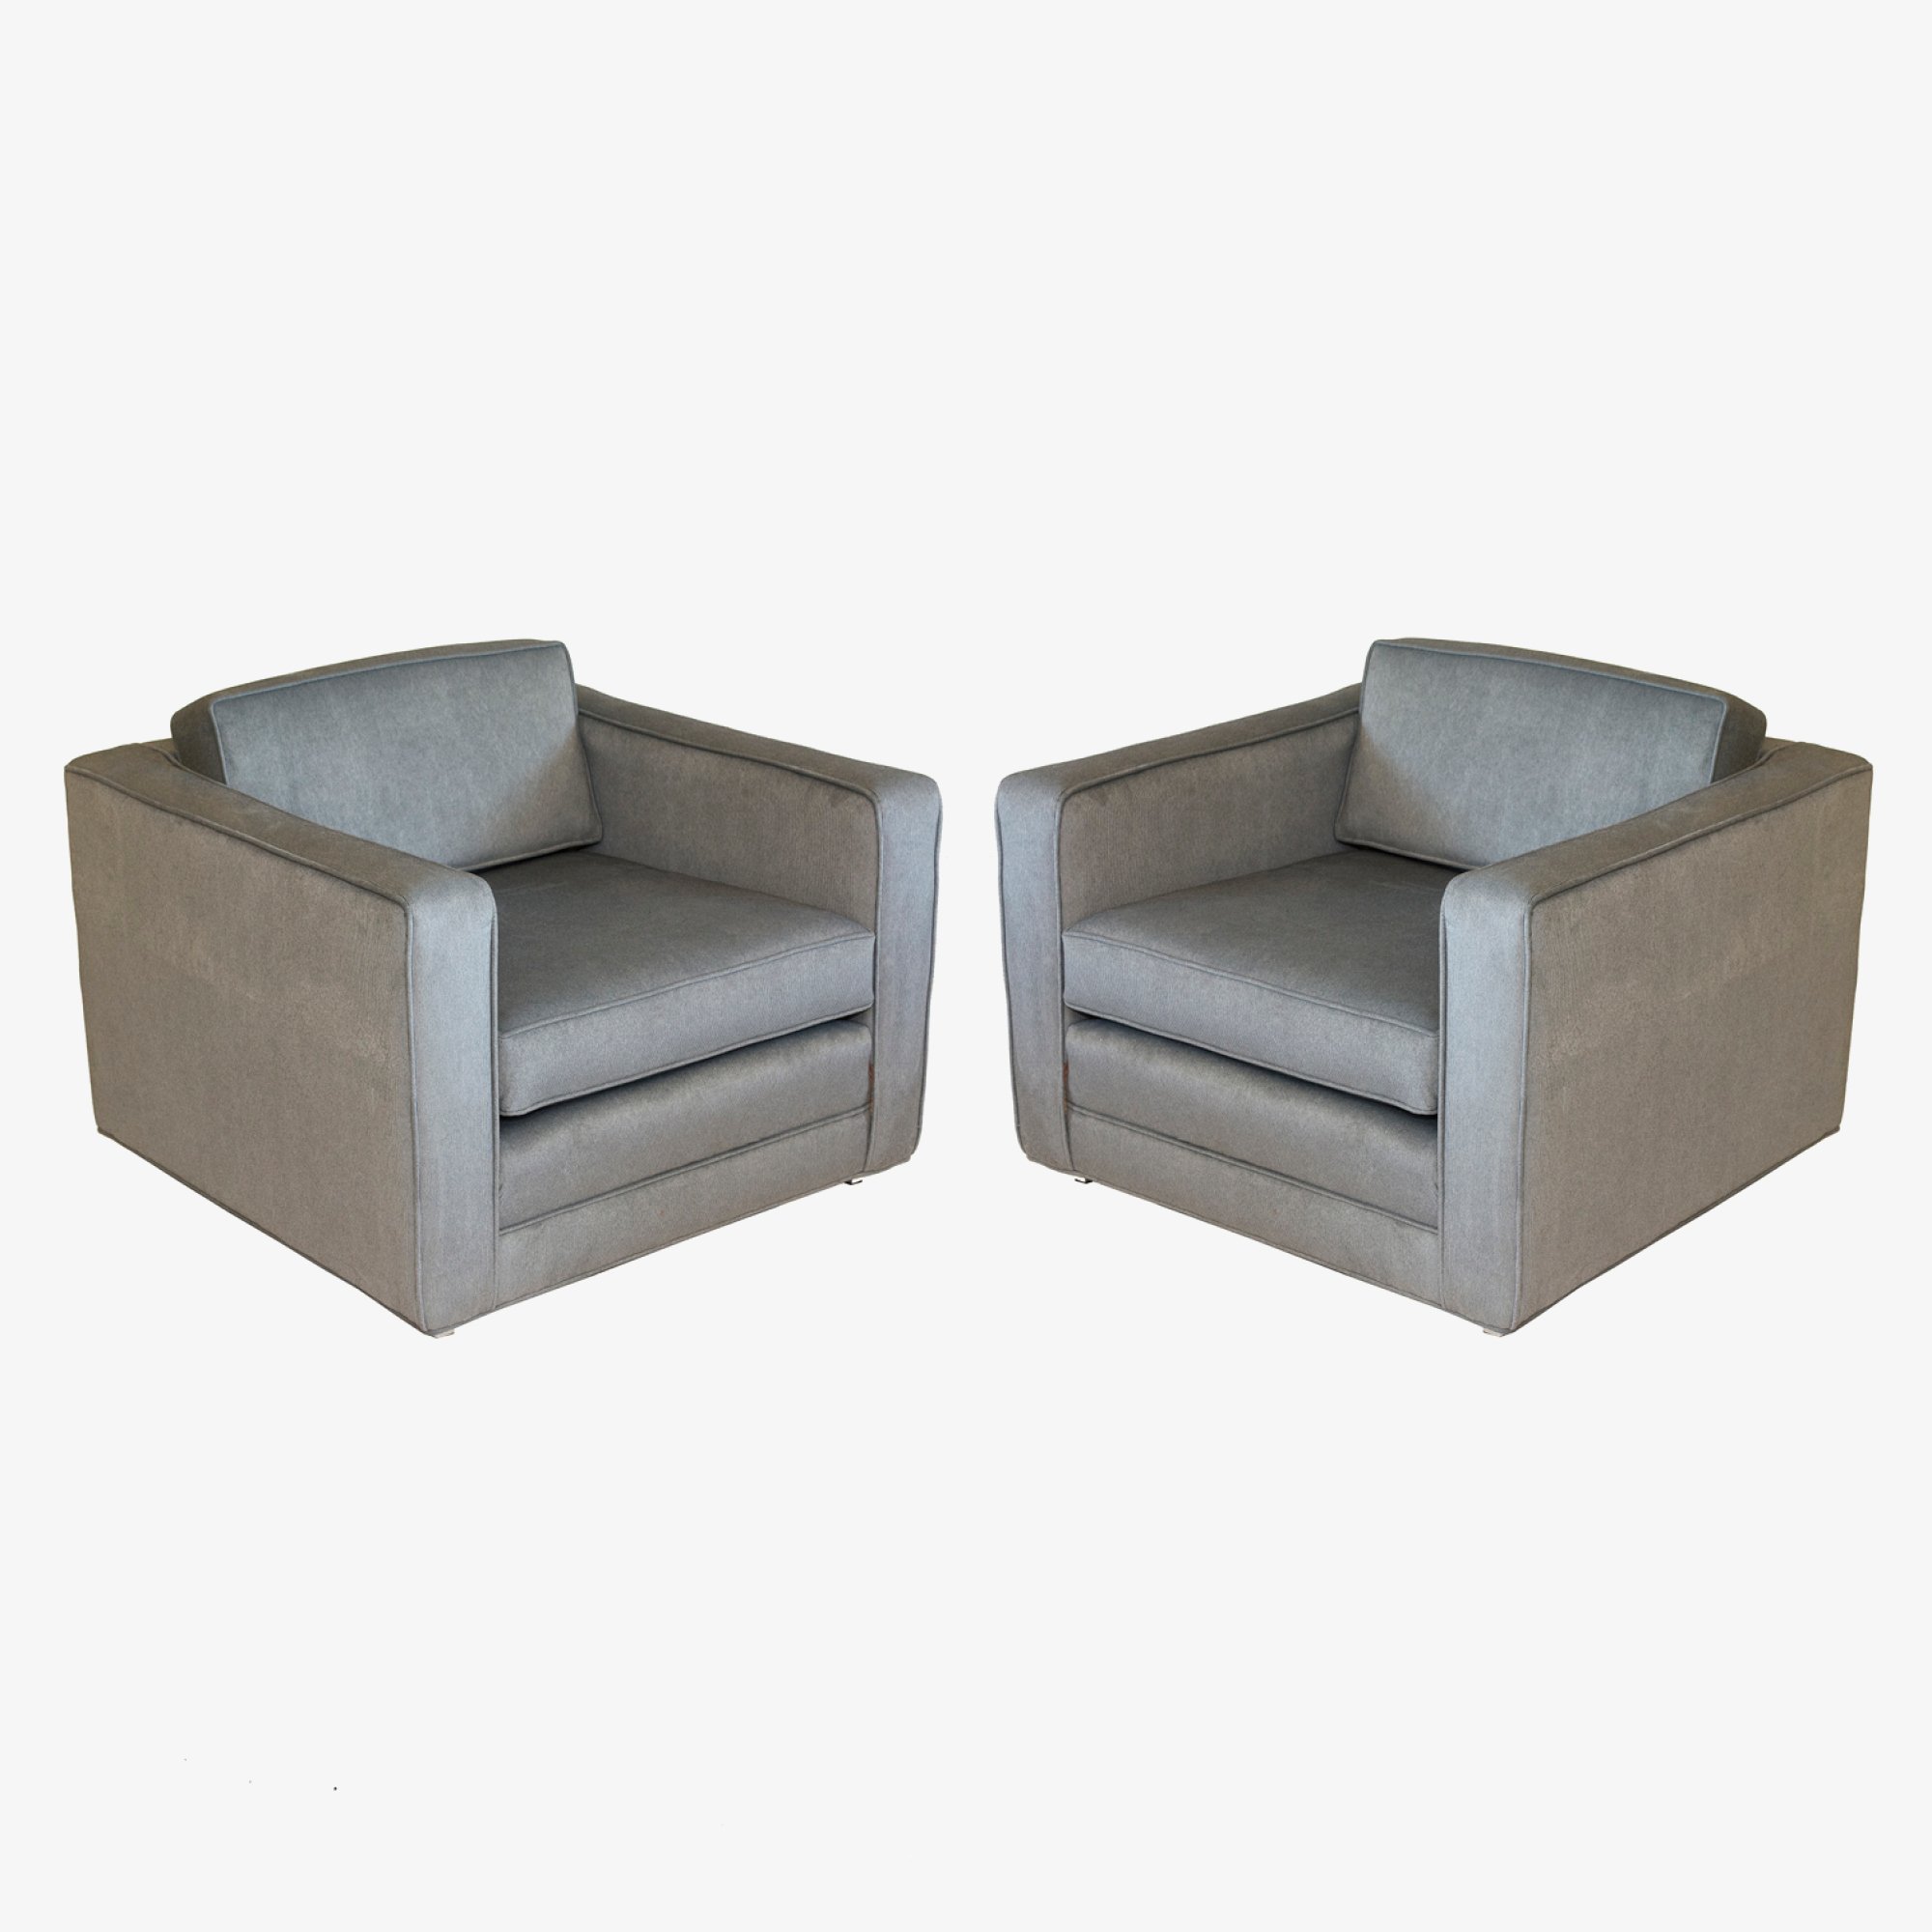 Charles Pfister for Knoll Cube Chairs Pair 7.jpg